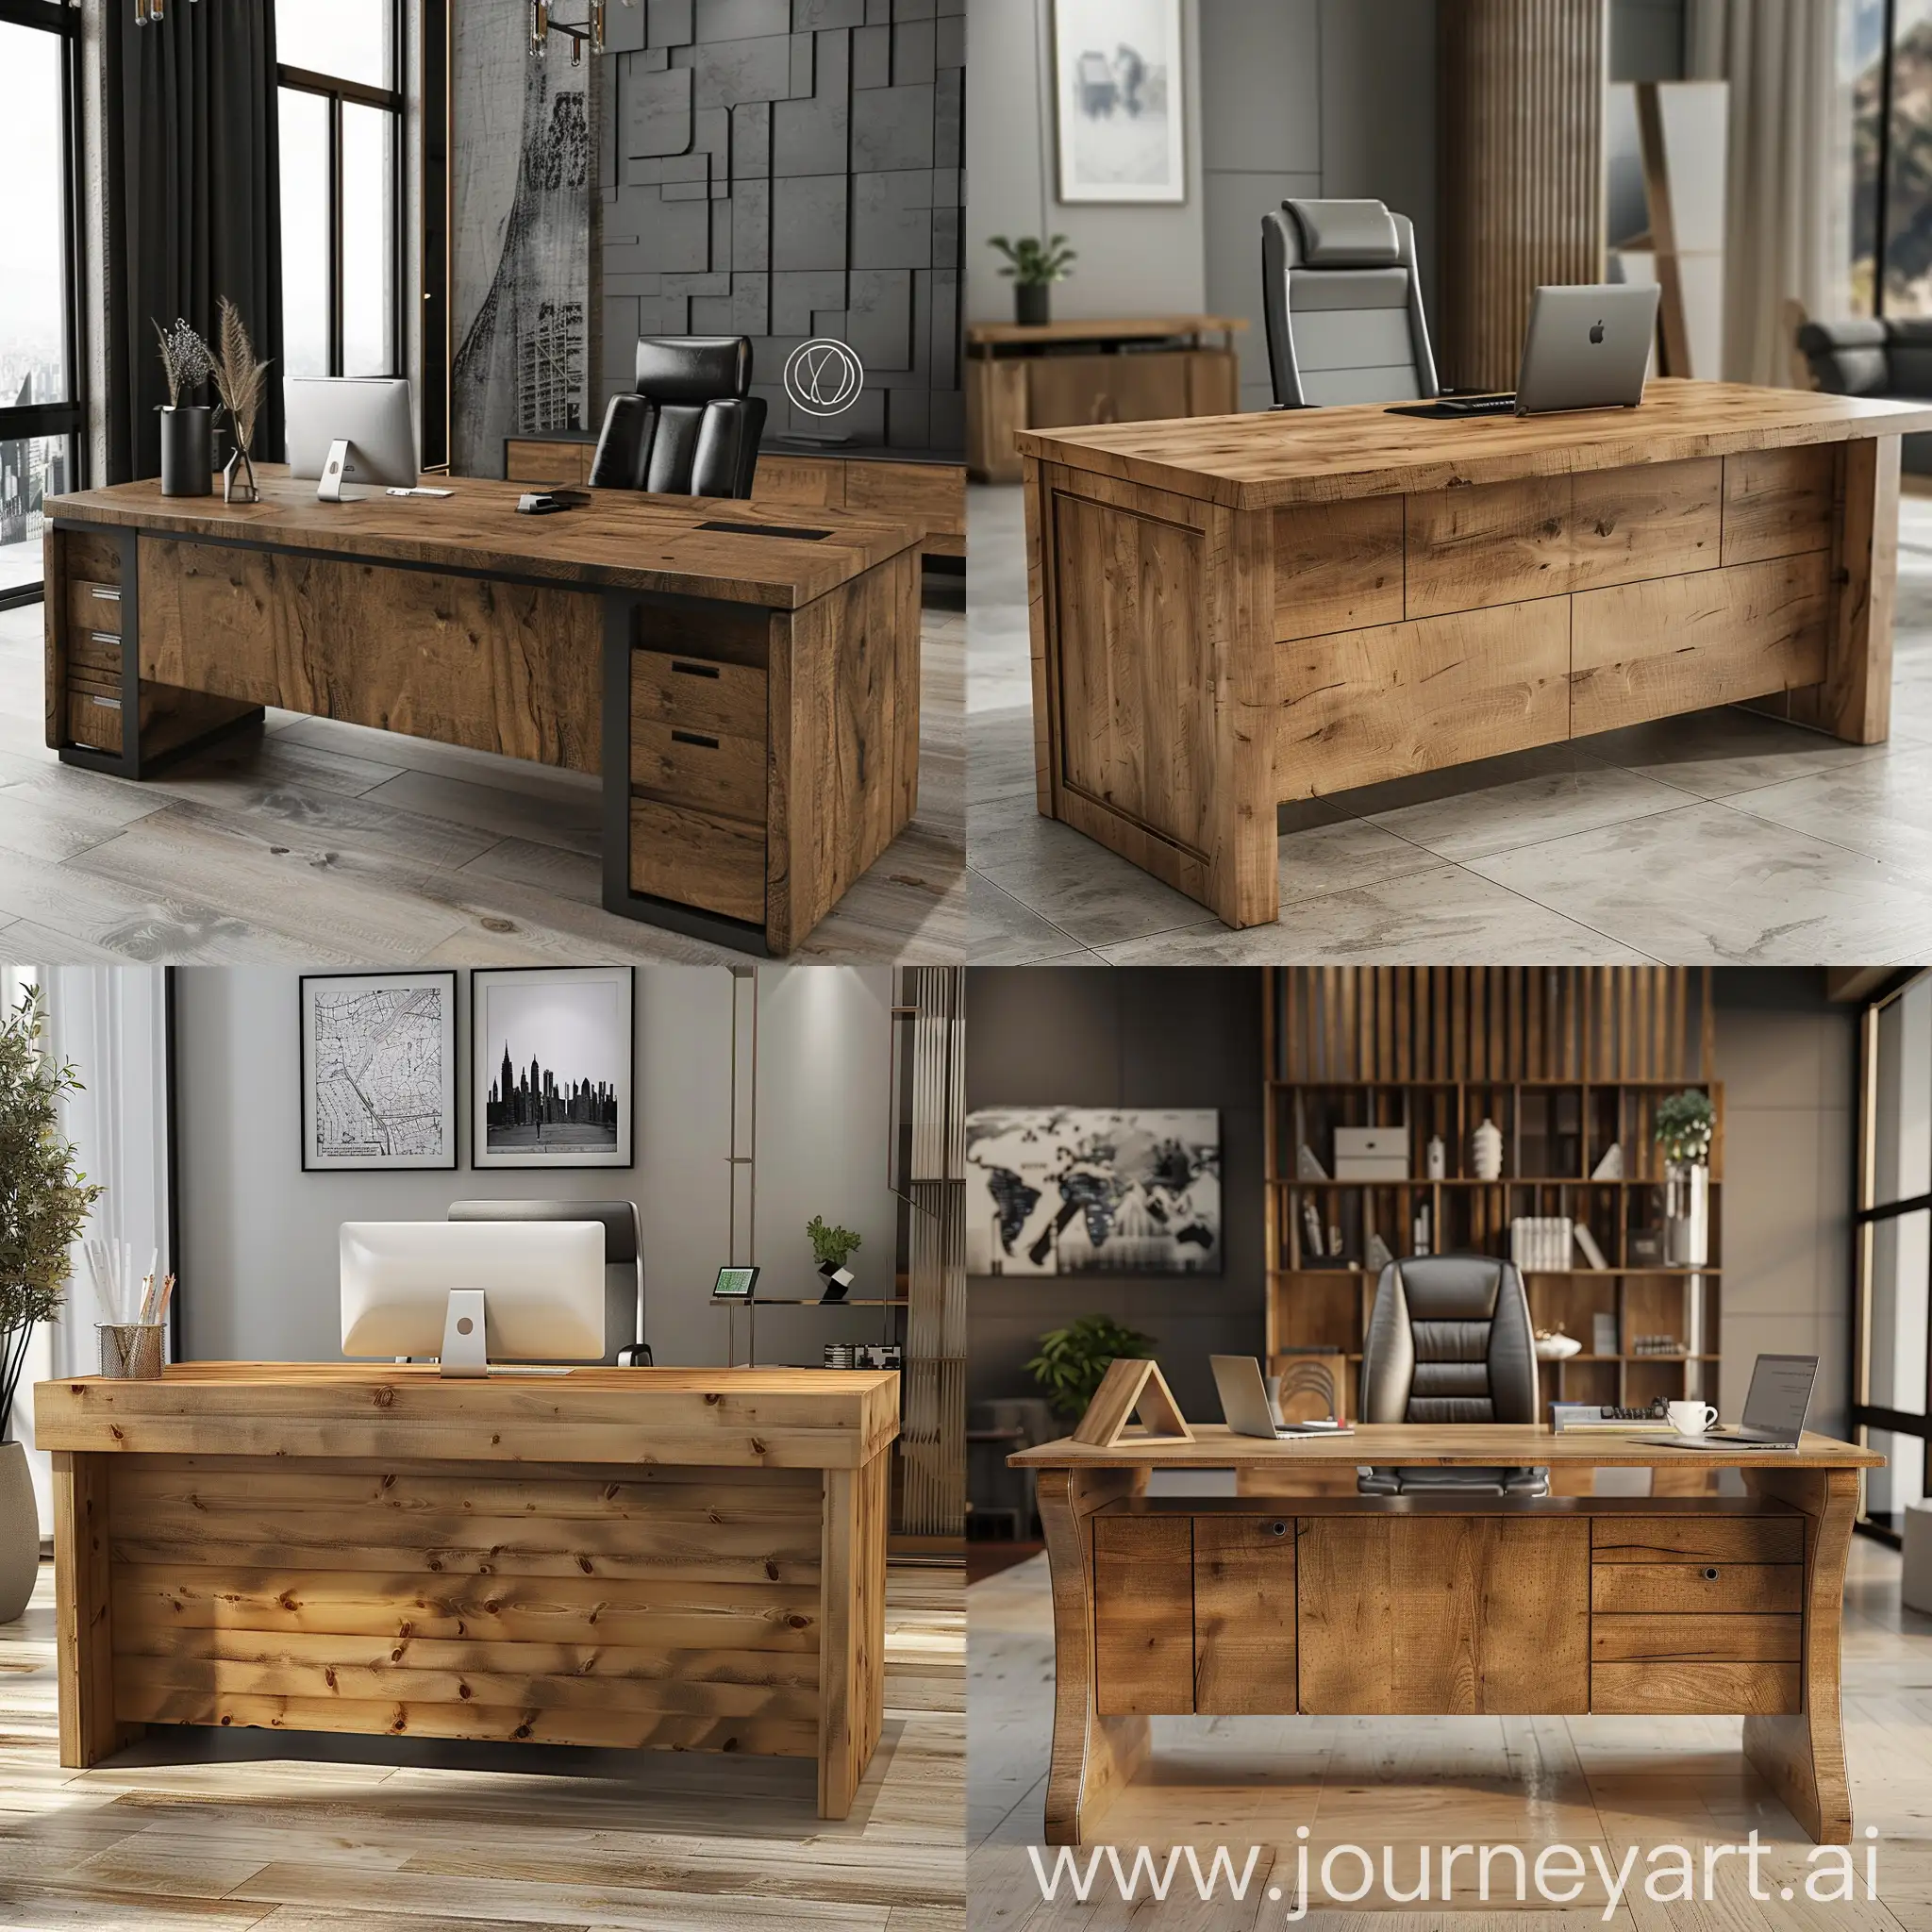 A simple wooden administrative desk in paramilitary style with a modern background 
